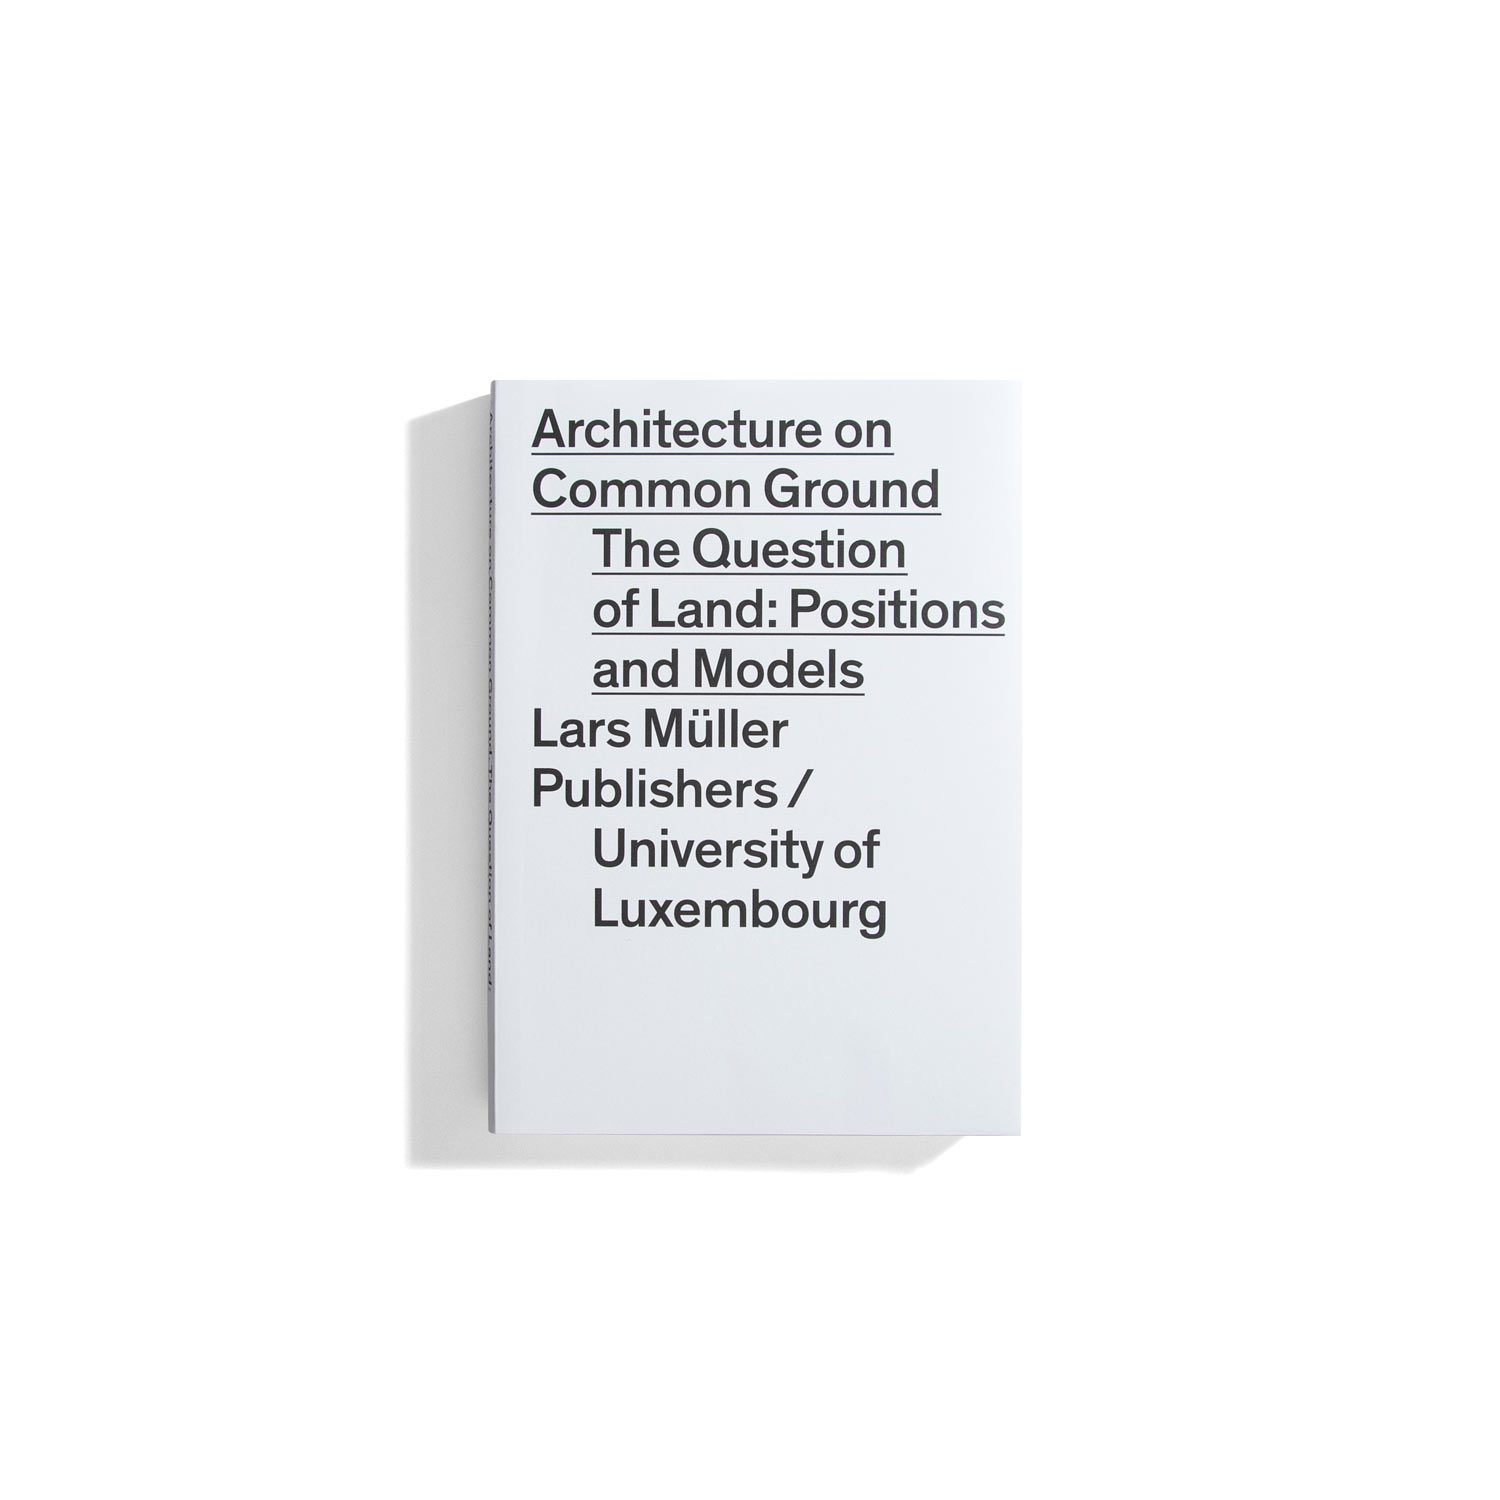 Architecture on Common Ground - The Question of Land: Positions and Models